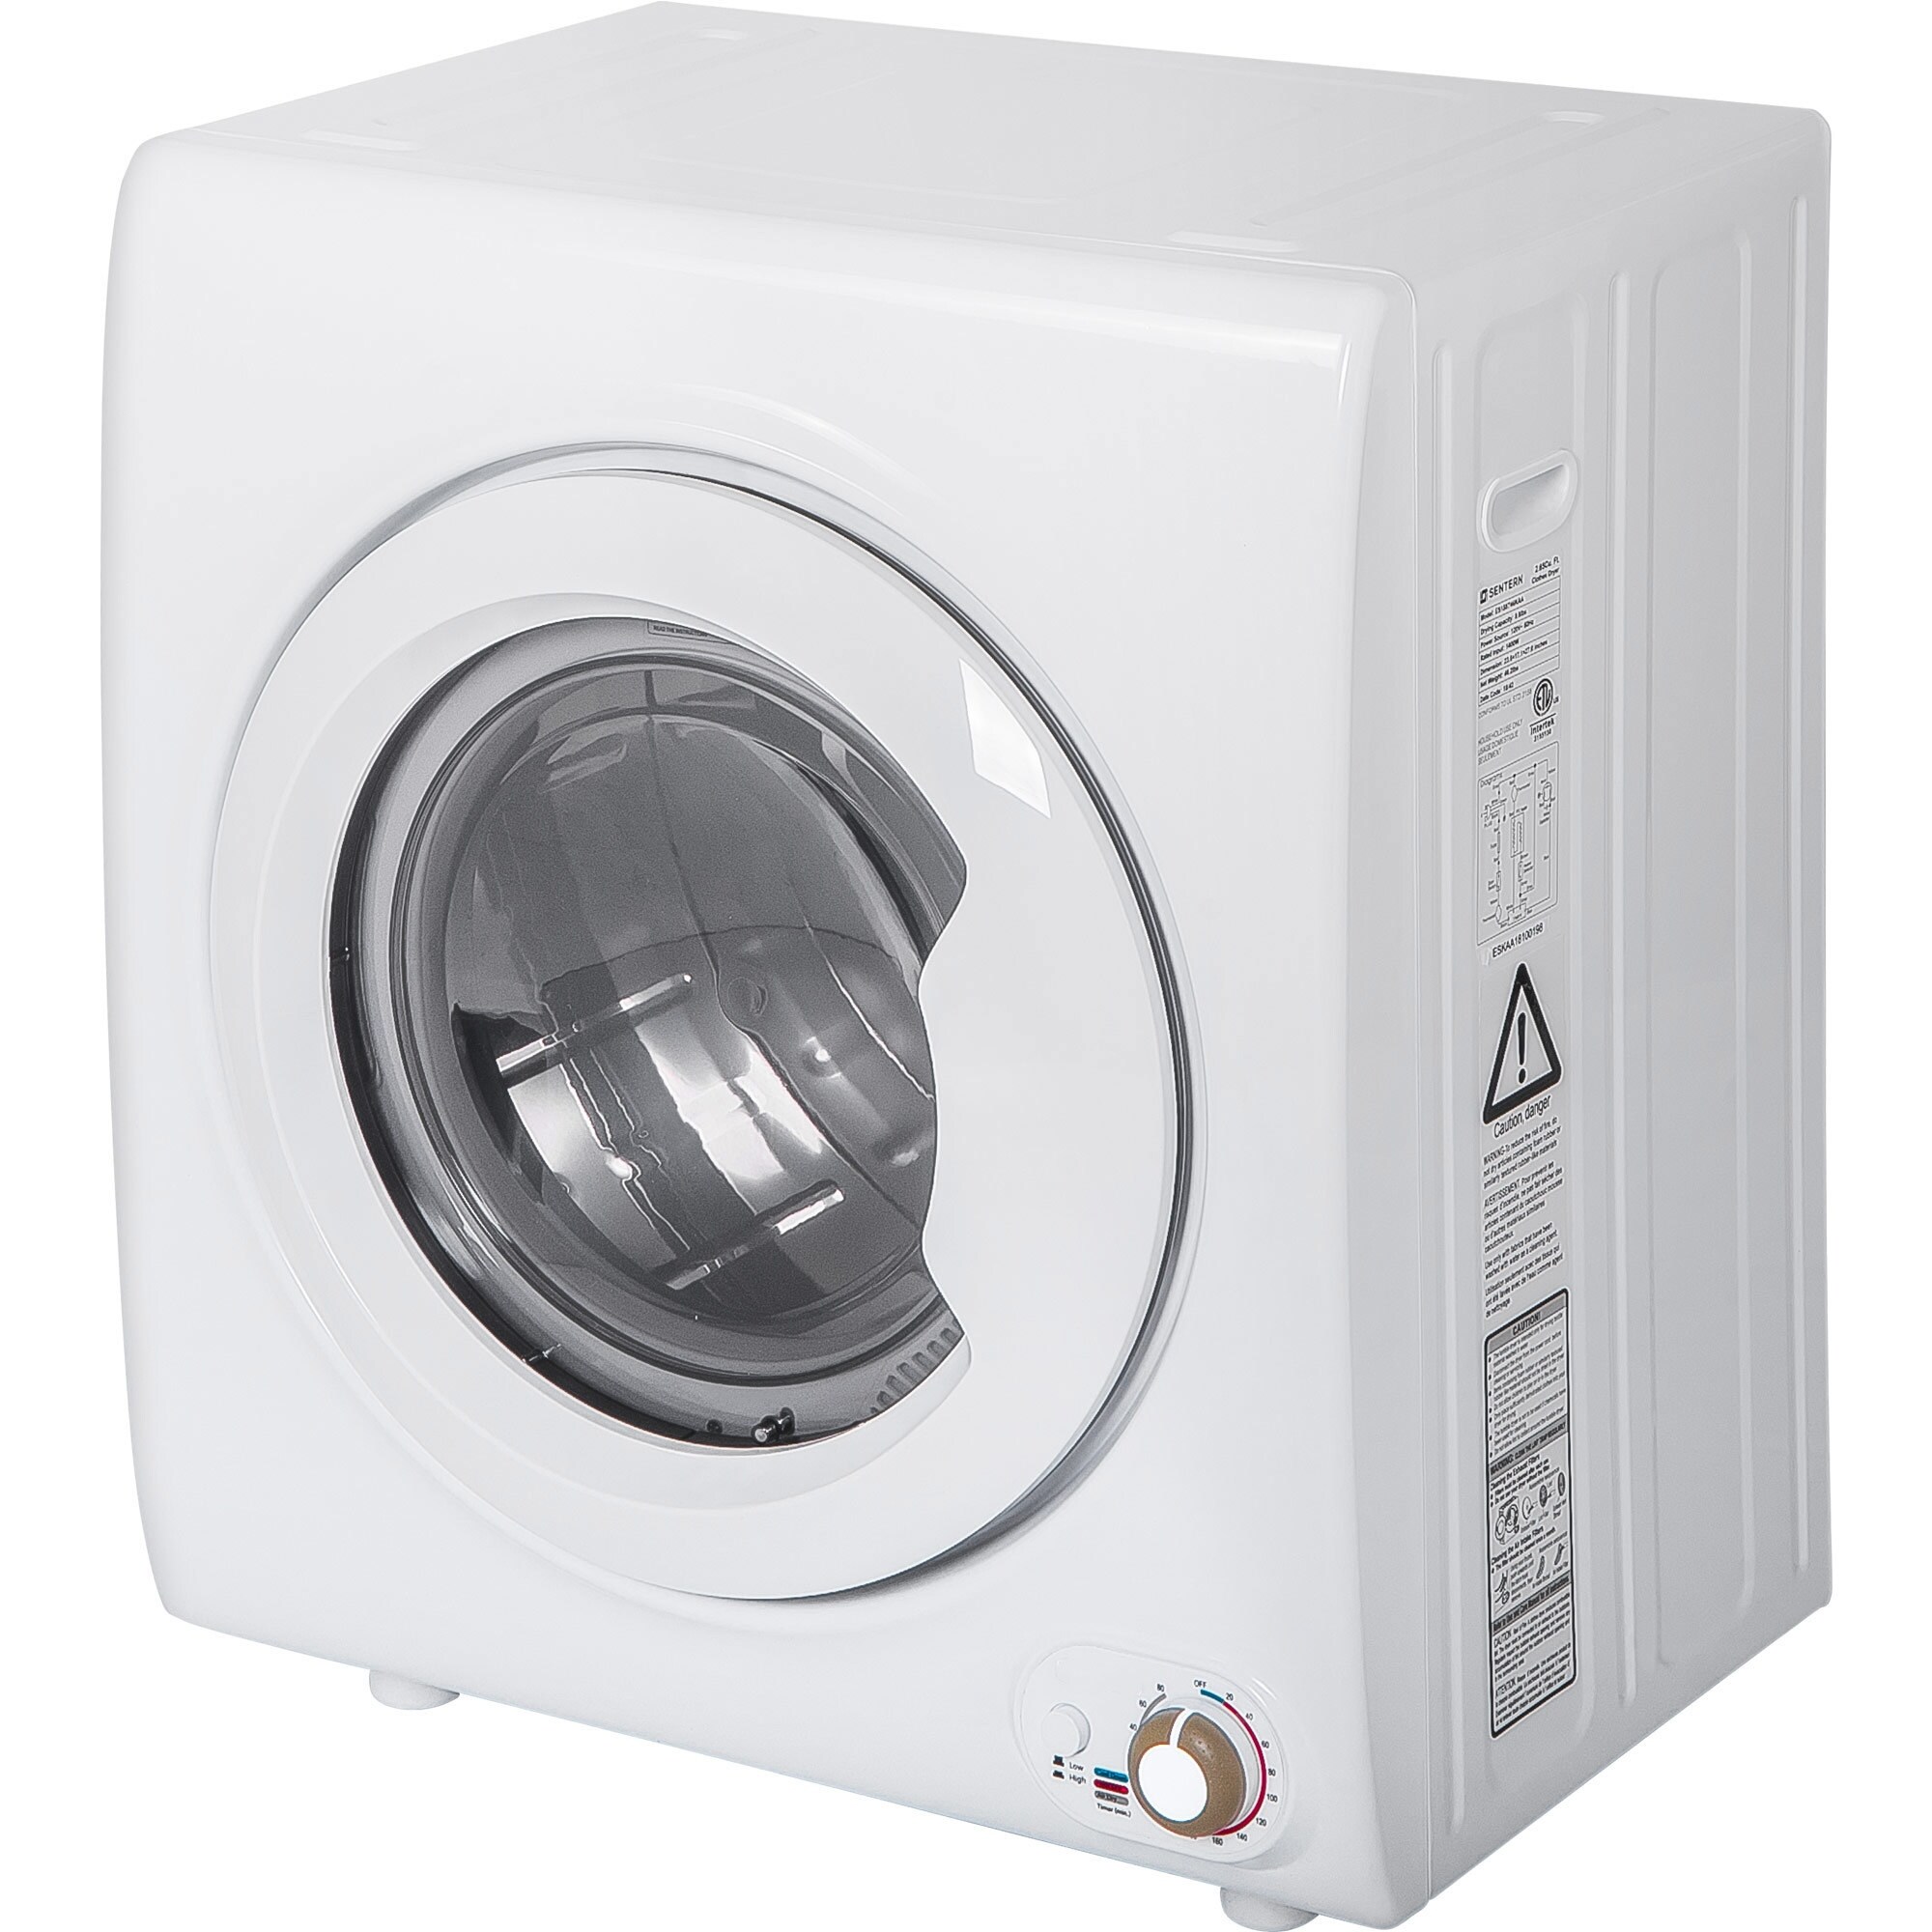 https://ak1.ostkcdn.com/images/products/is/images/direct/dc96c712bfaba64133ccd28050d4ed3a2623e7aa/2.65-Cu.Ft-Laundry-Dryer%3B-9-LBS-Capacity-Tumble-Dryer-with-1400W-Drying-Power%3B-Easy-Control-Clothes-Dryer.jpg